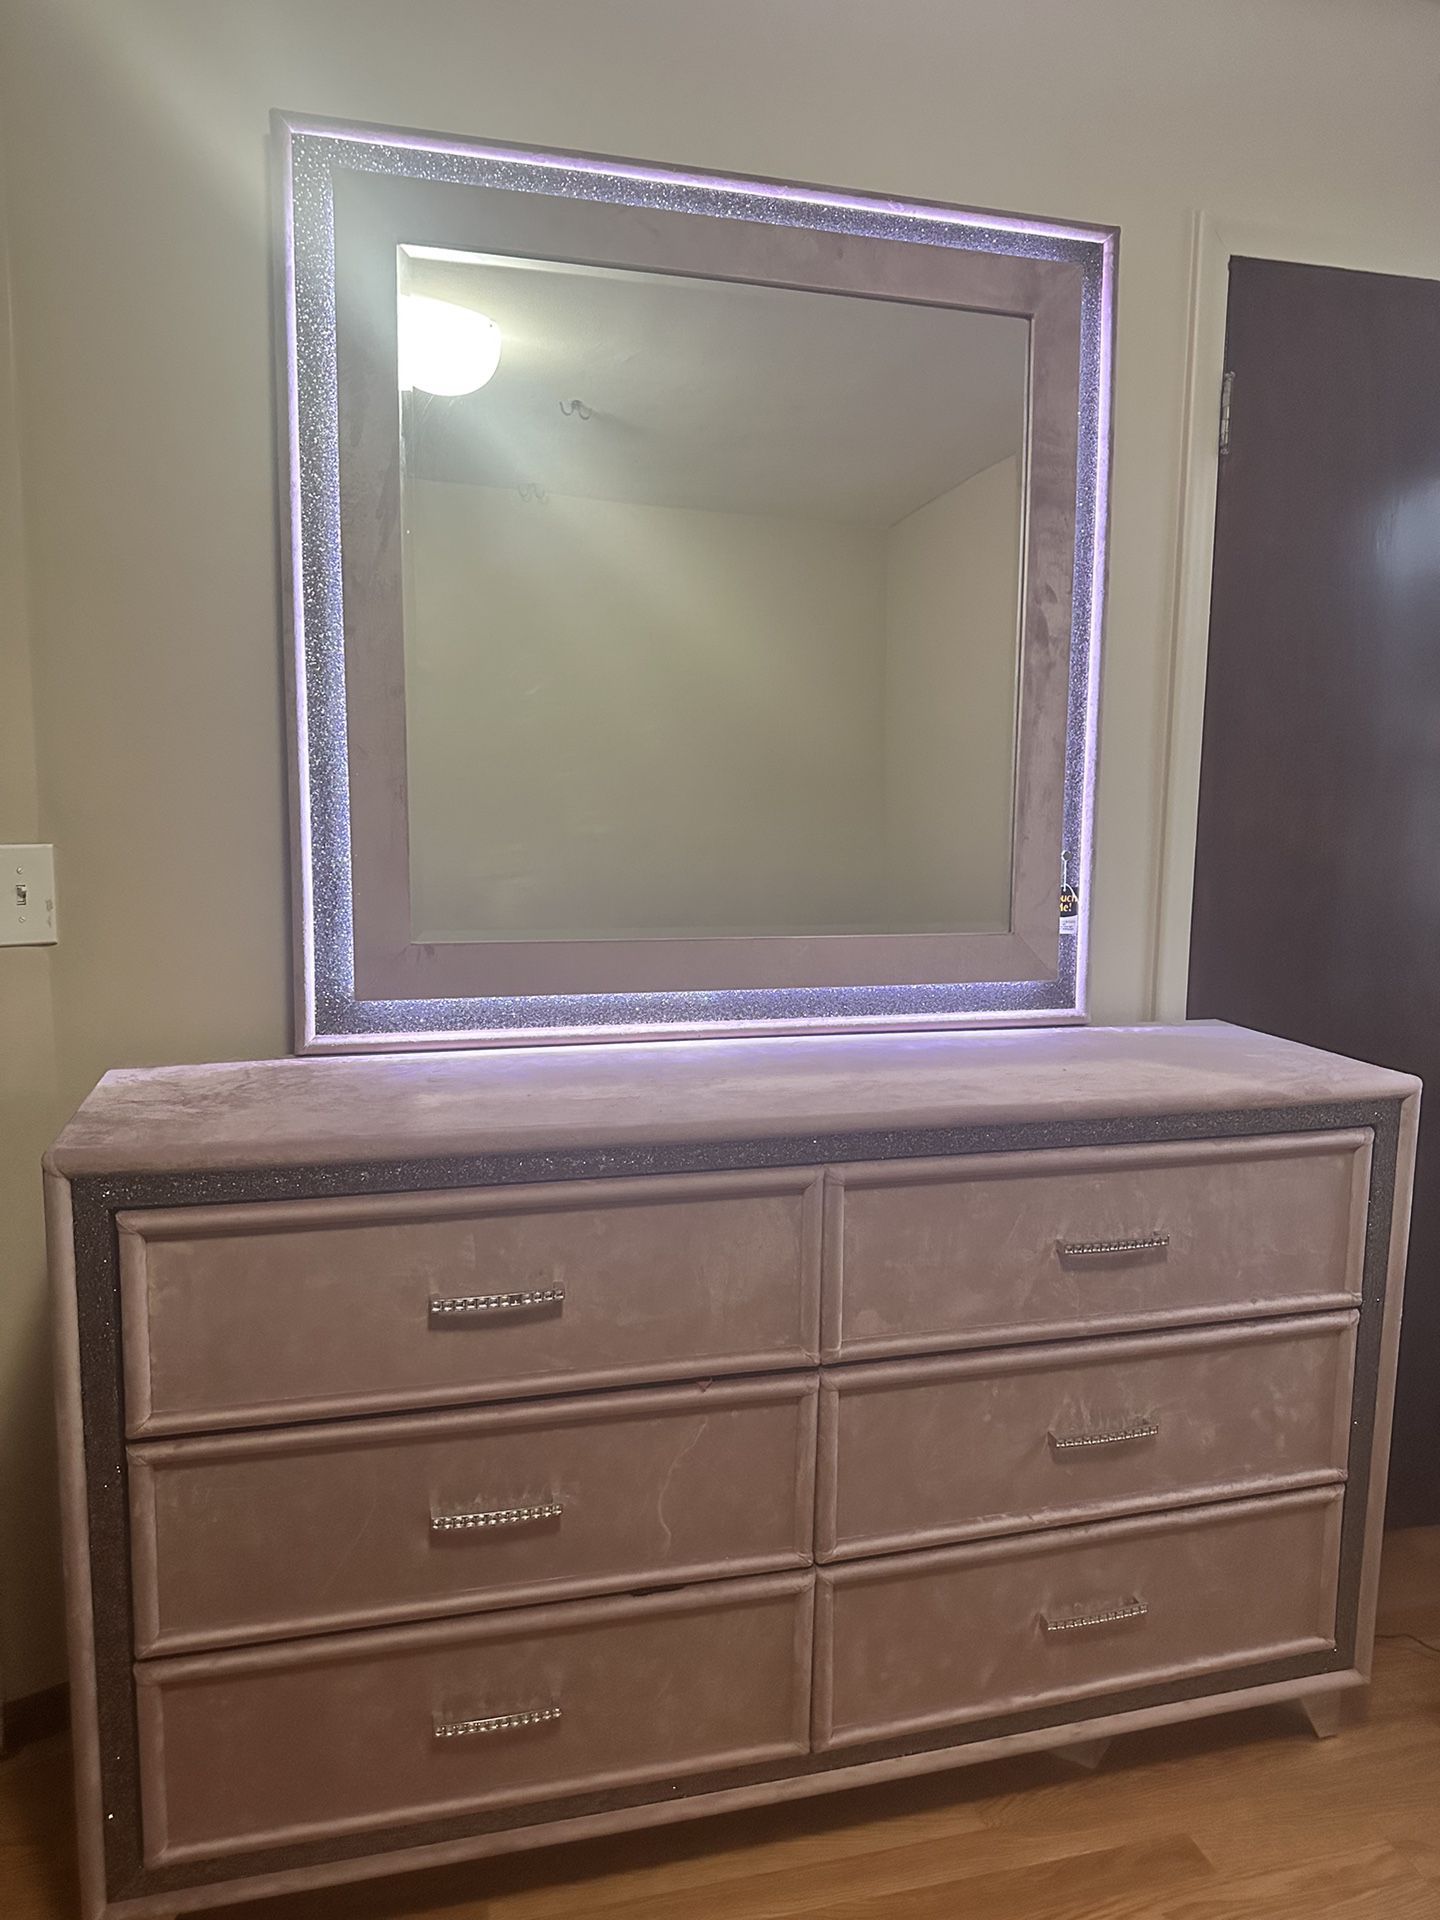  Makeup vanity with lights and drawers